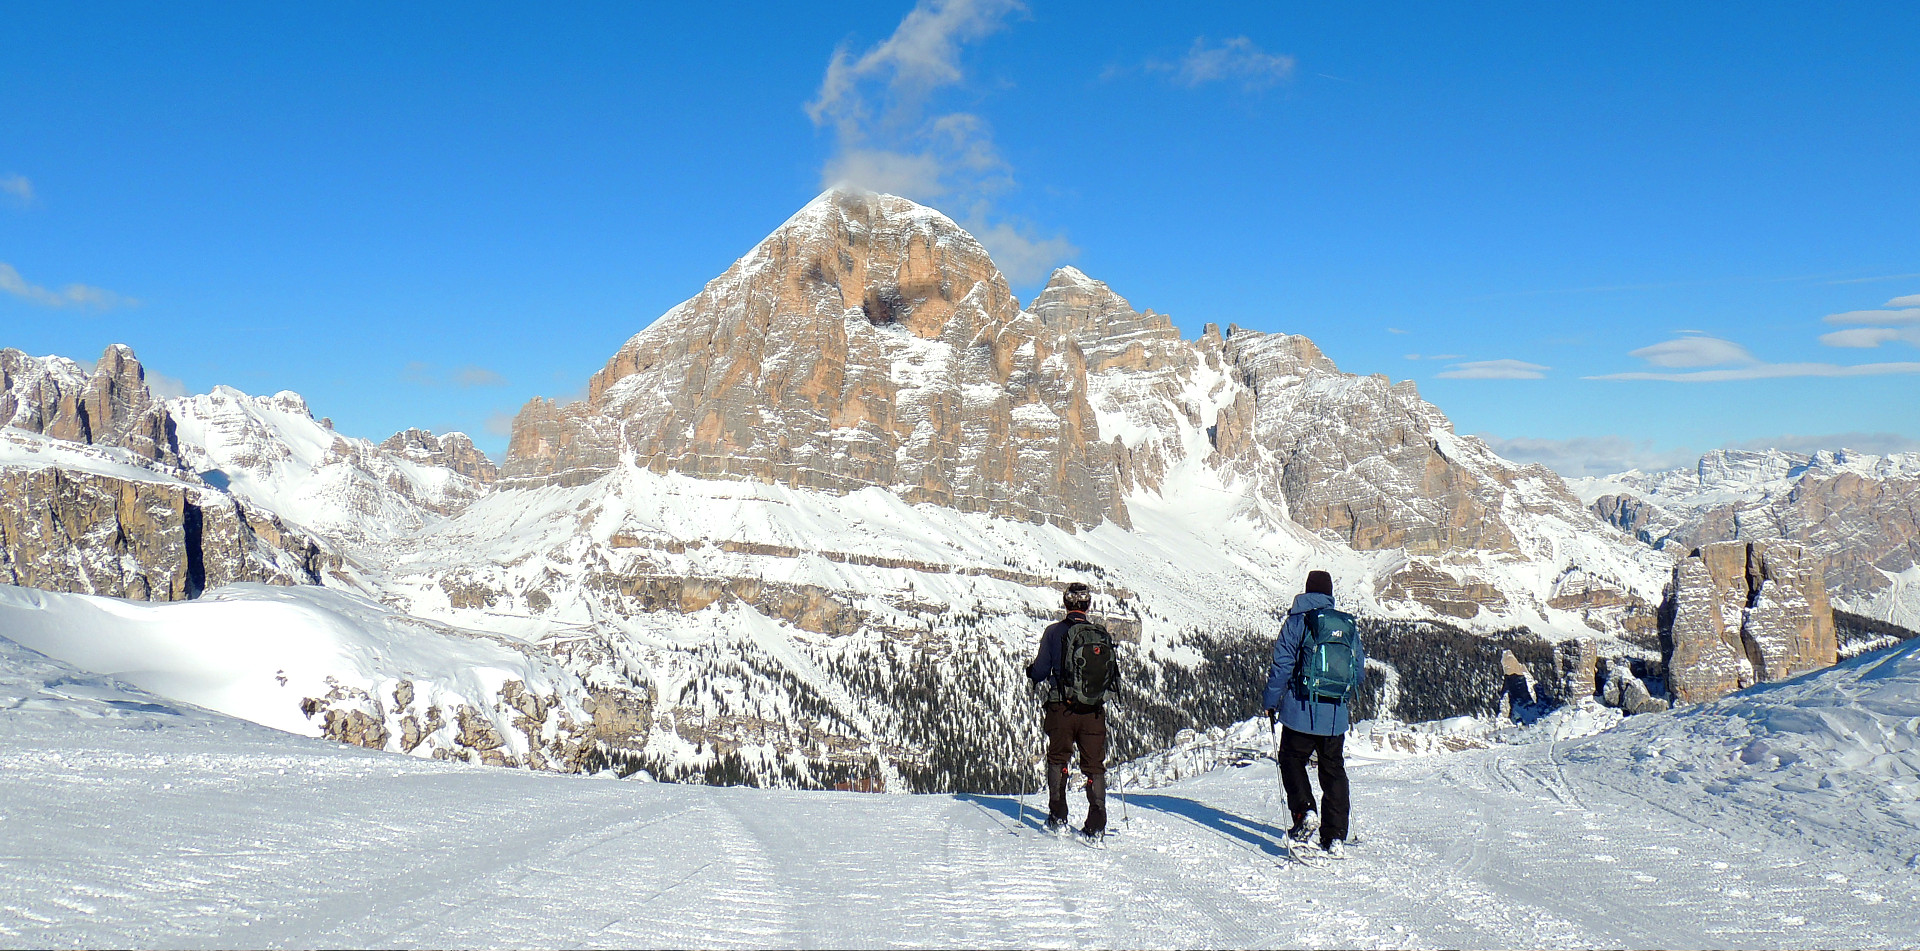 Snowshoeing in the Dolomites is wonderful!